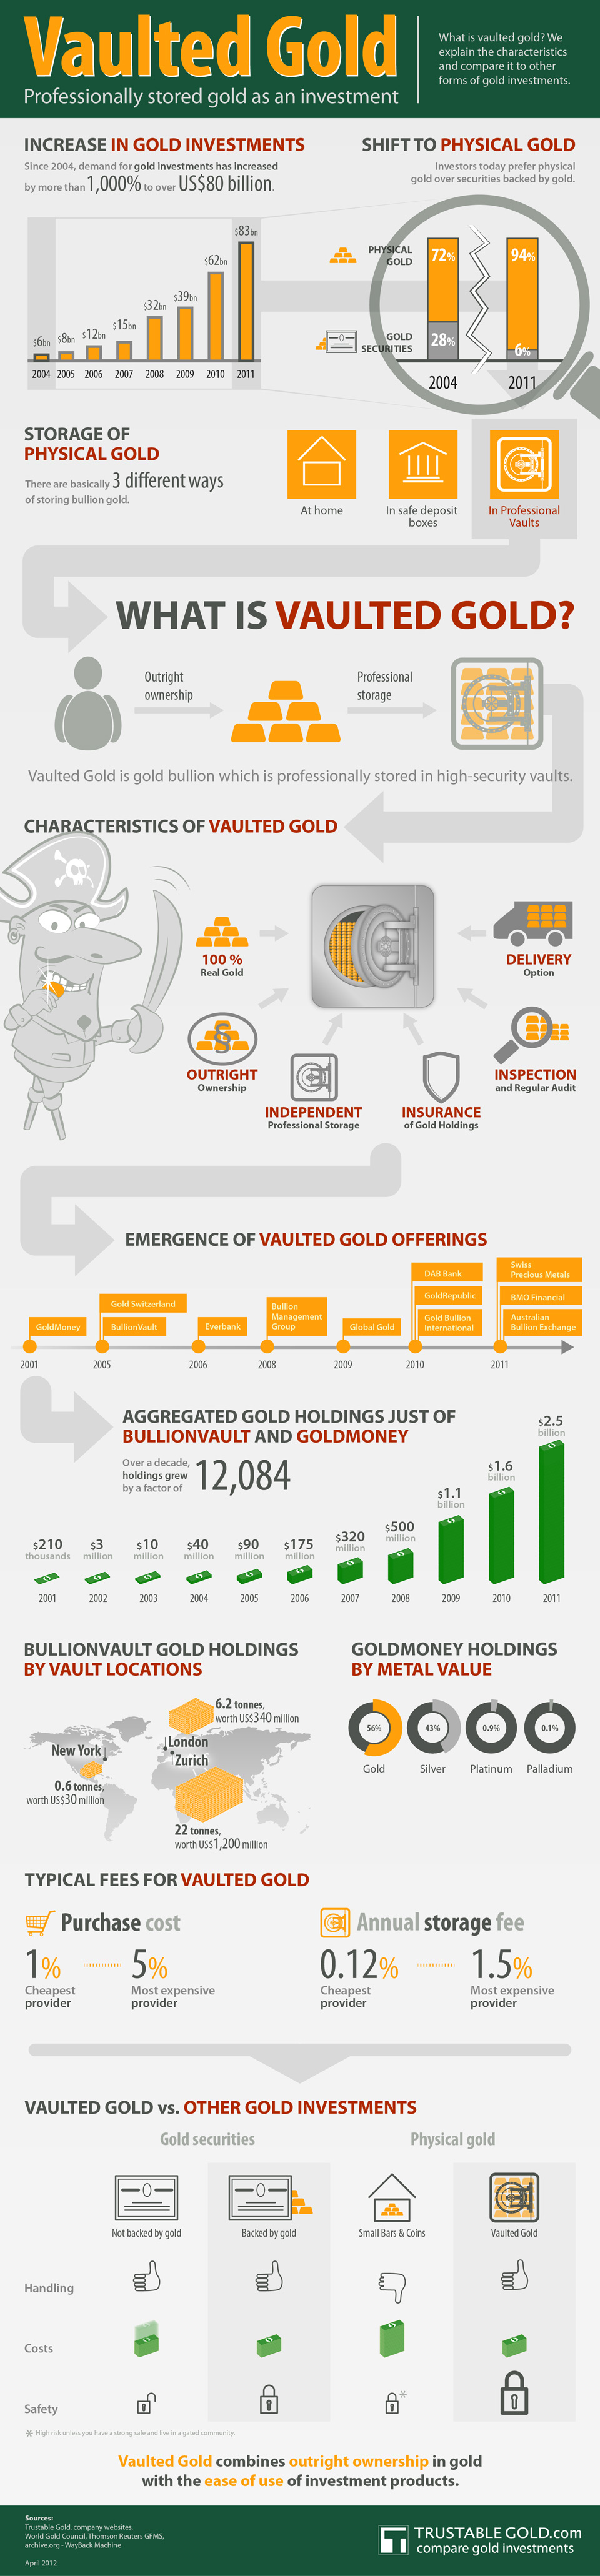 Vaulted Gold Infographic: Concept and facts about investing in vaulted gold